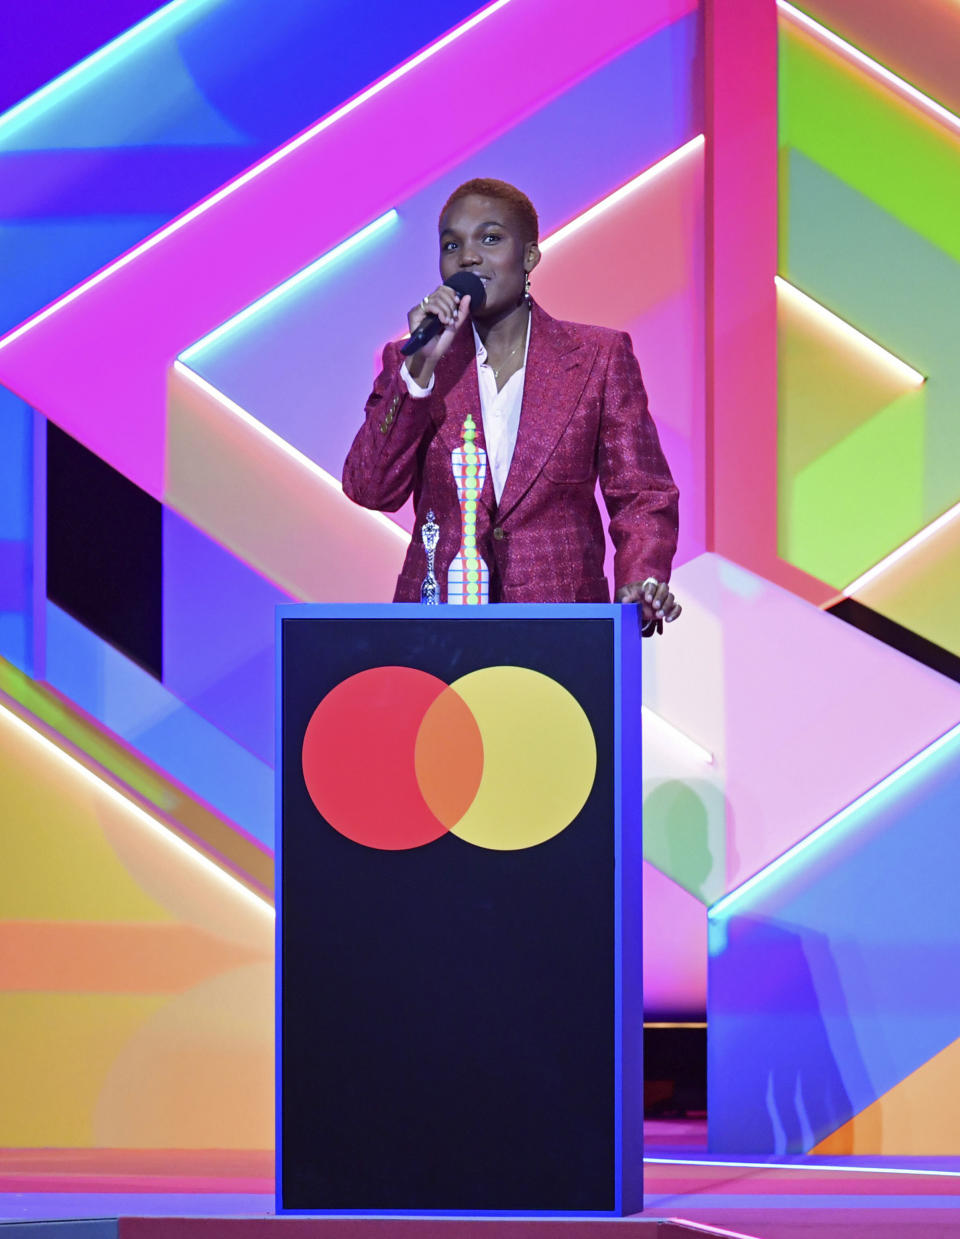 Arlo Parks accepts the award for Breakthrough Artist during the Brit Awards 2021 at the O2 Arena, London, Tuesday, May 11, 2021. (Ian West/PA via AP)